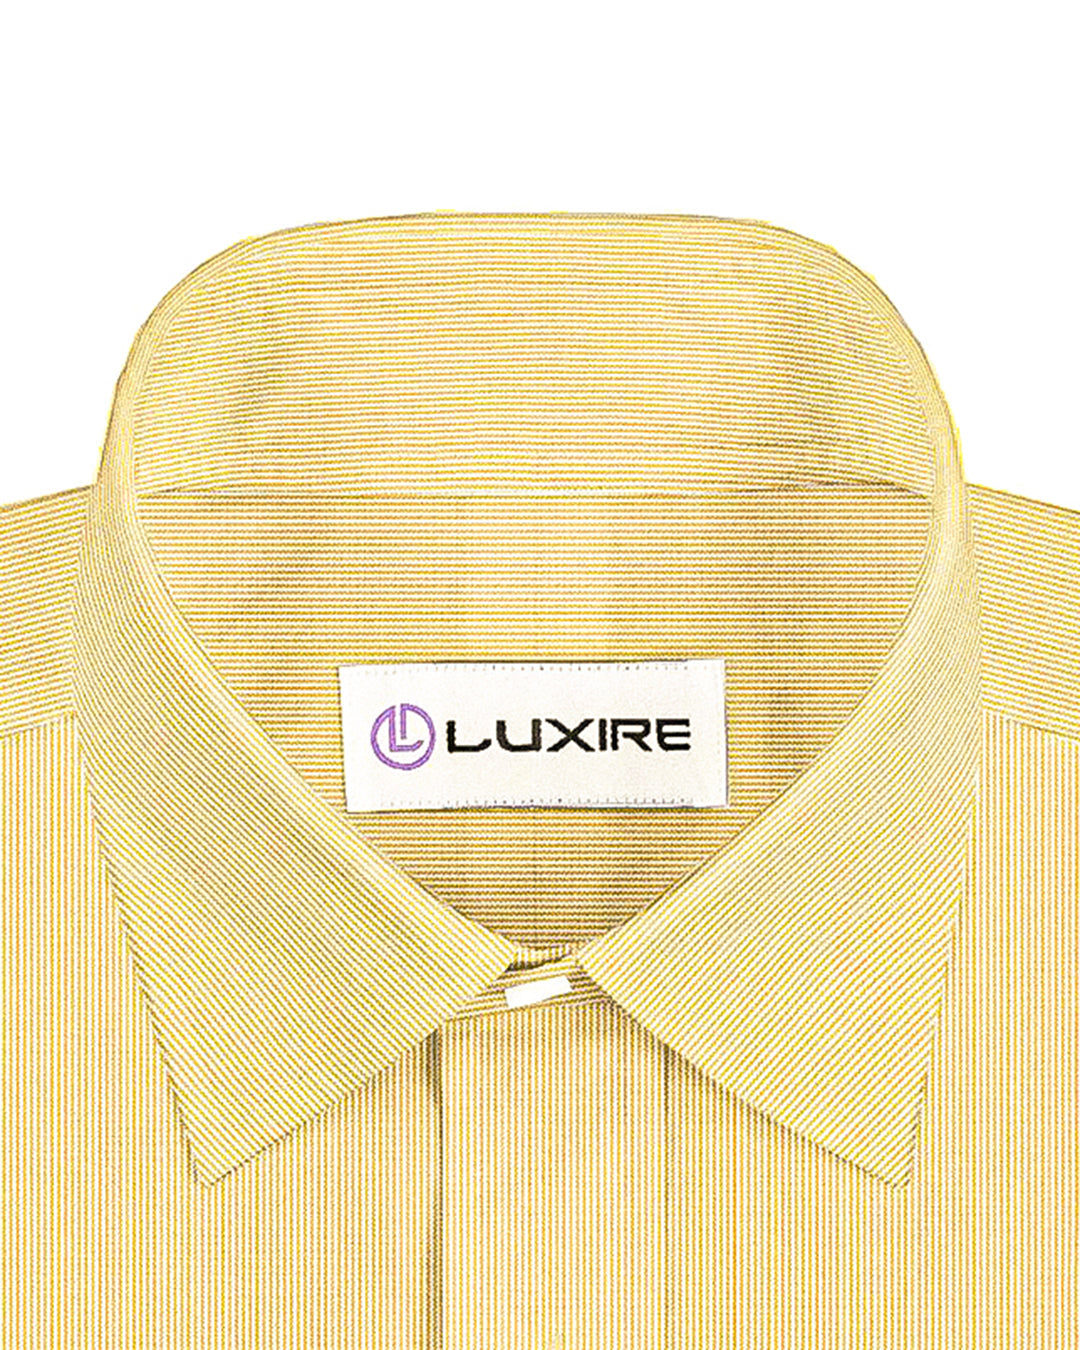 Collar of the custom linen shirt for men in light ecru dress stripes by Luxire Clothing